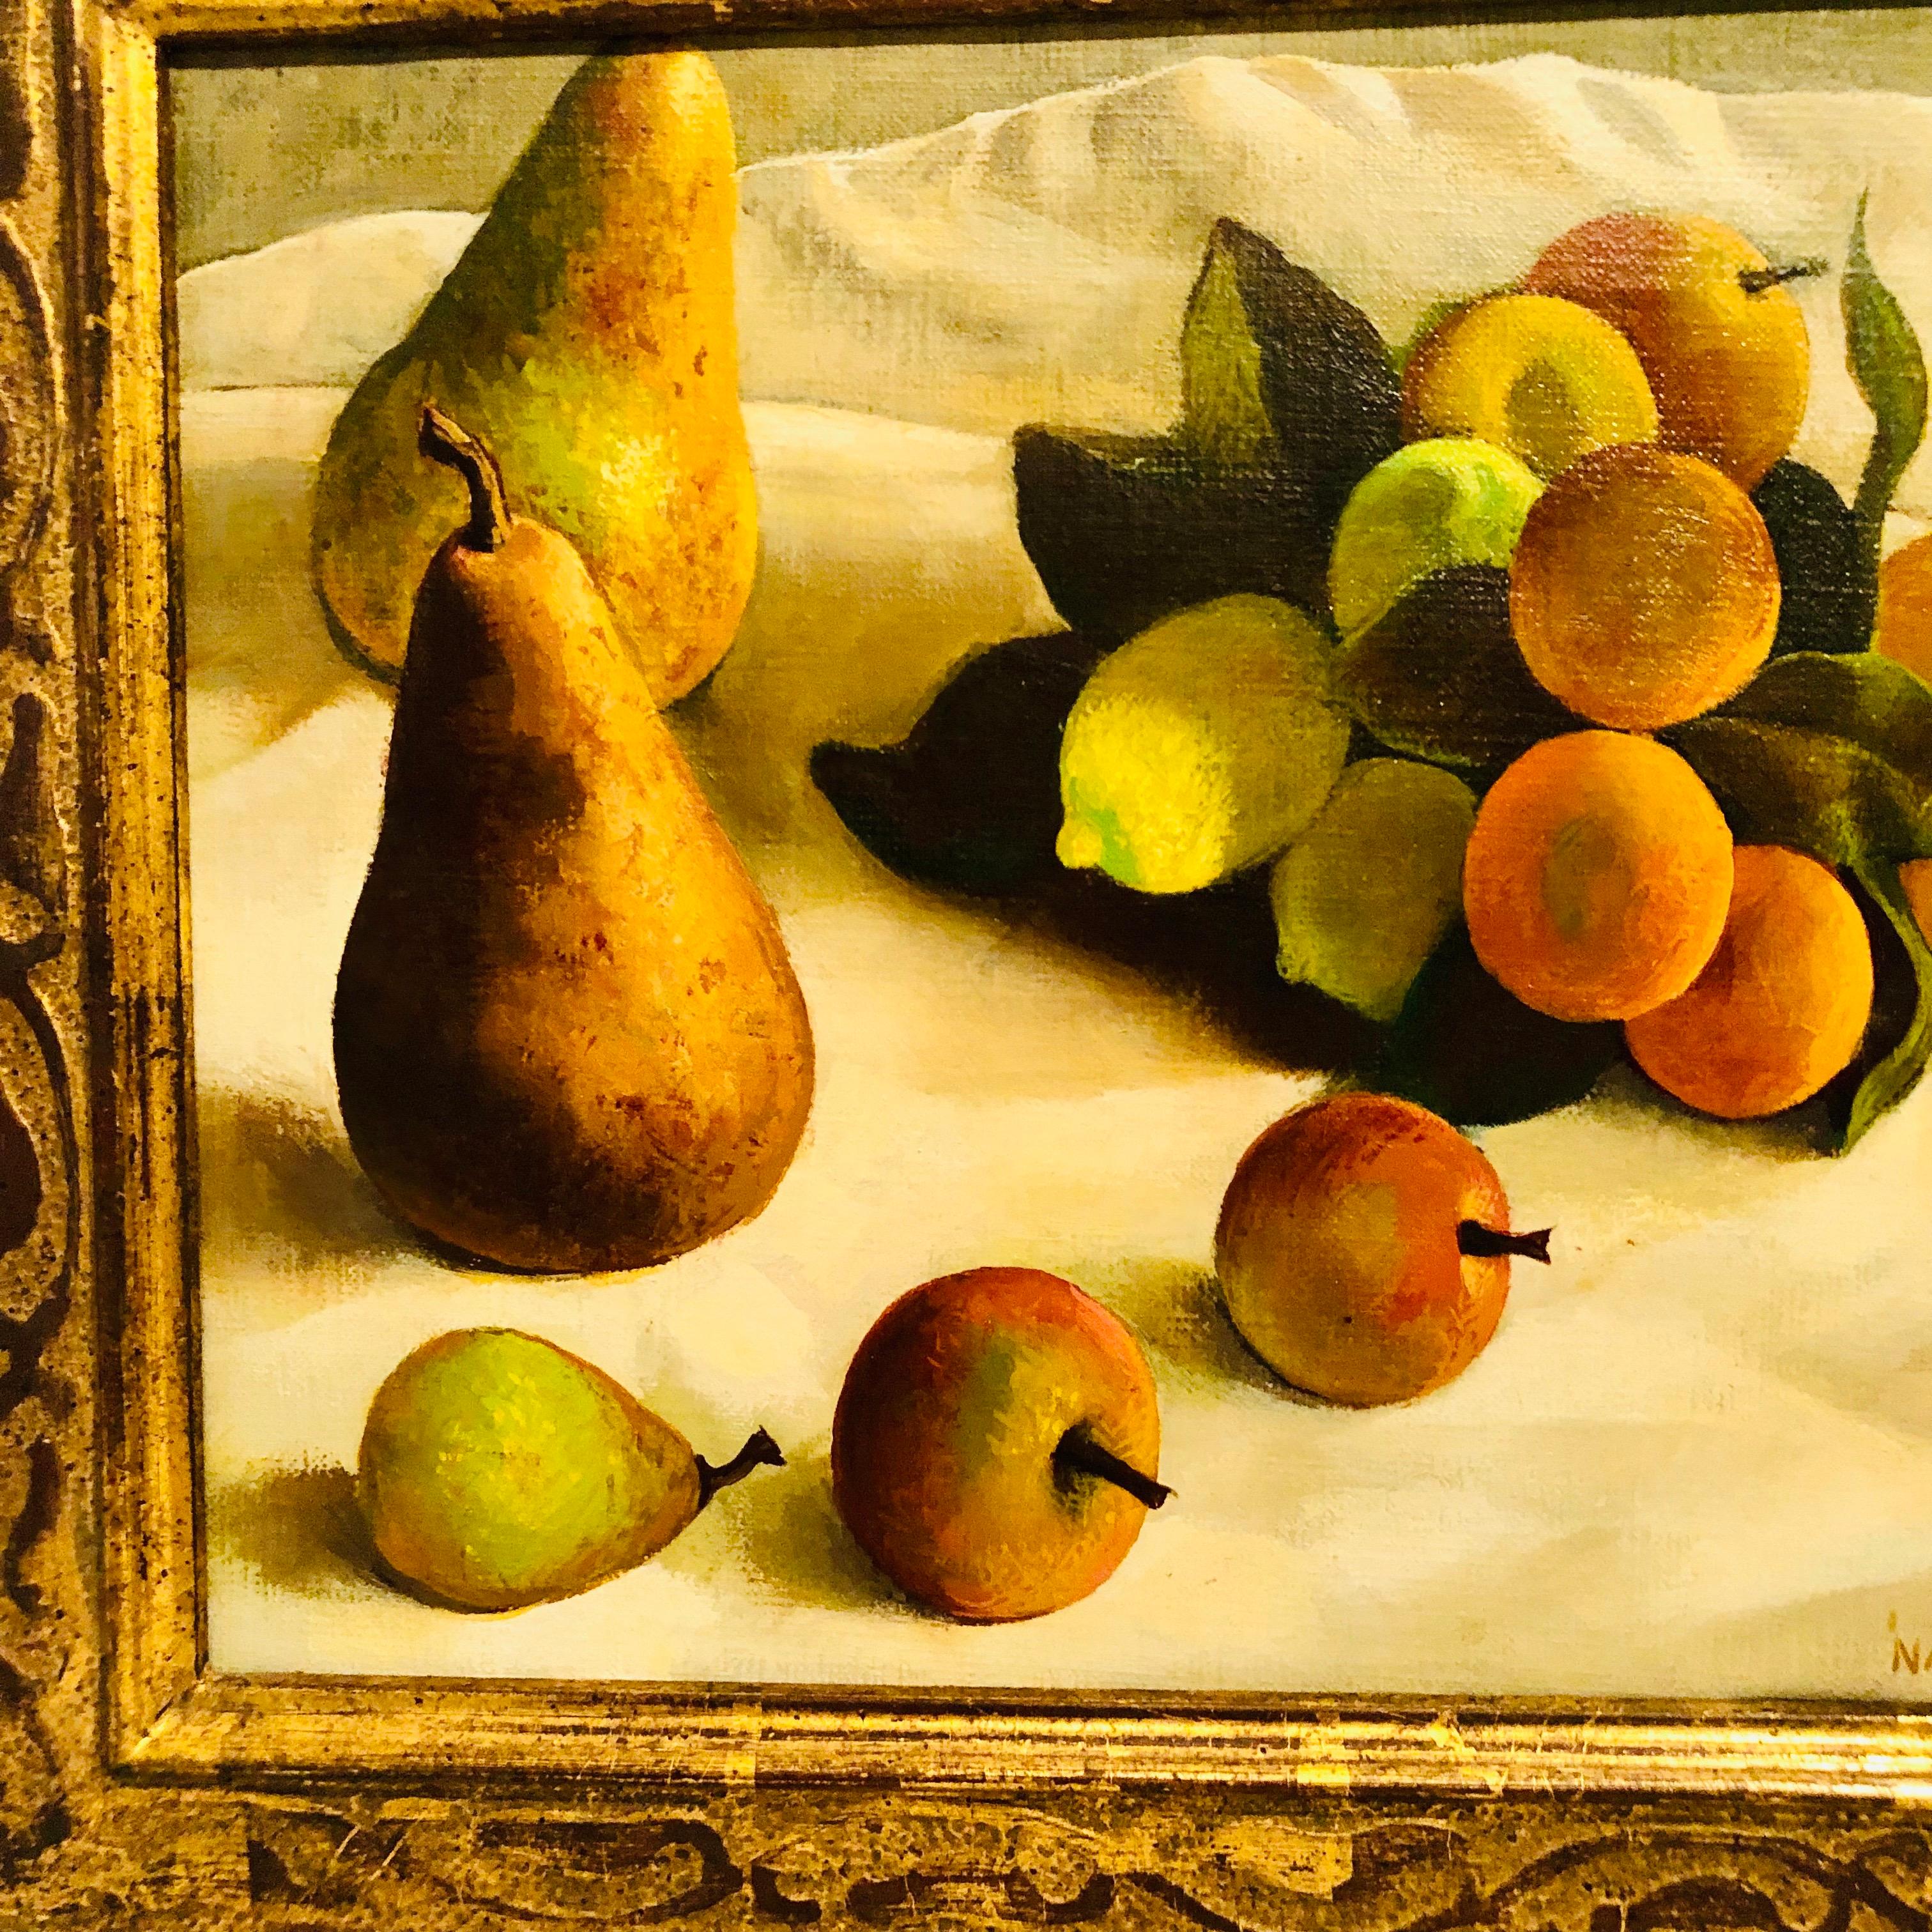 Oil on Canvas Painting of Pears and Other Fruits in a Gold Frame Signed Nadeau 1